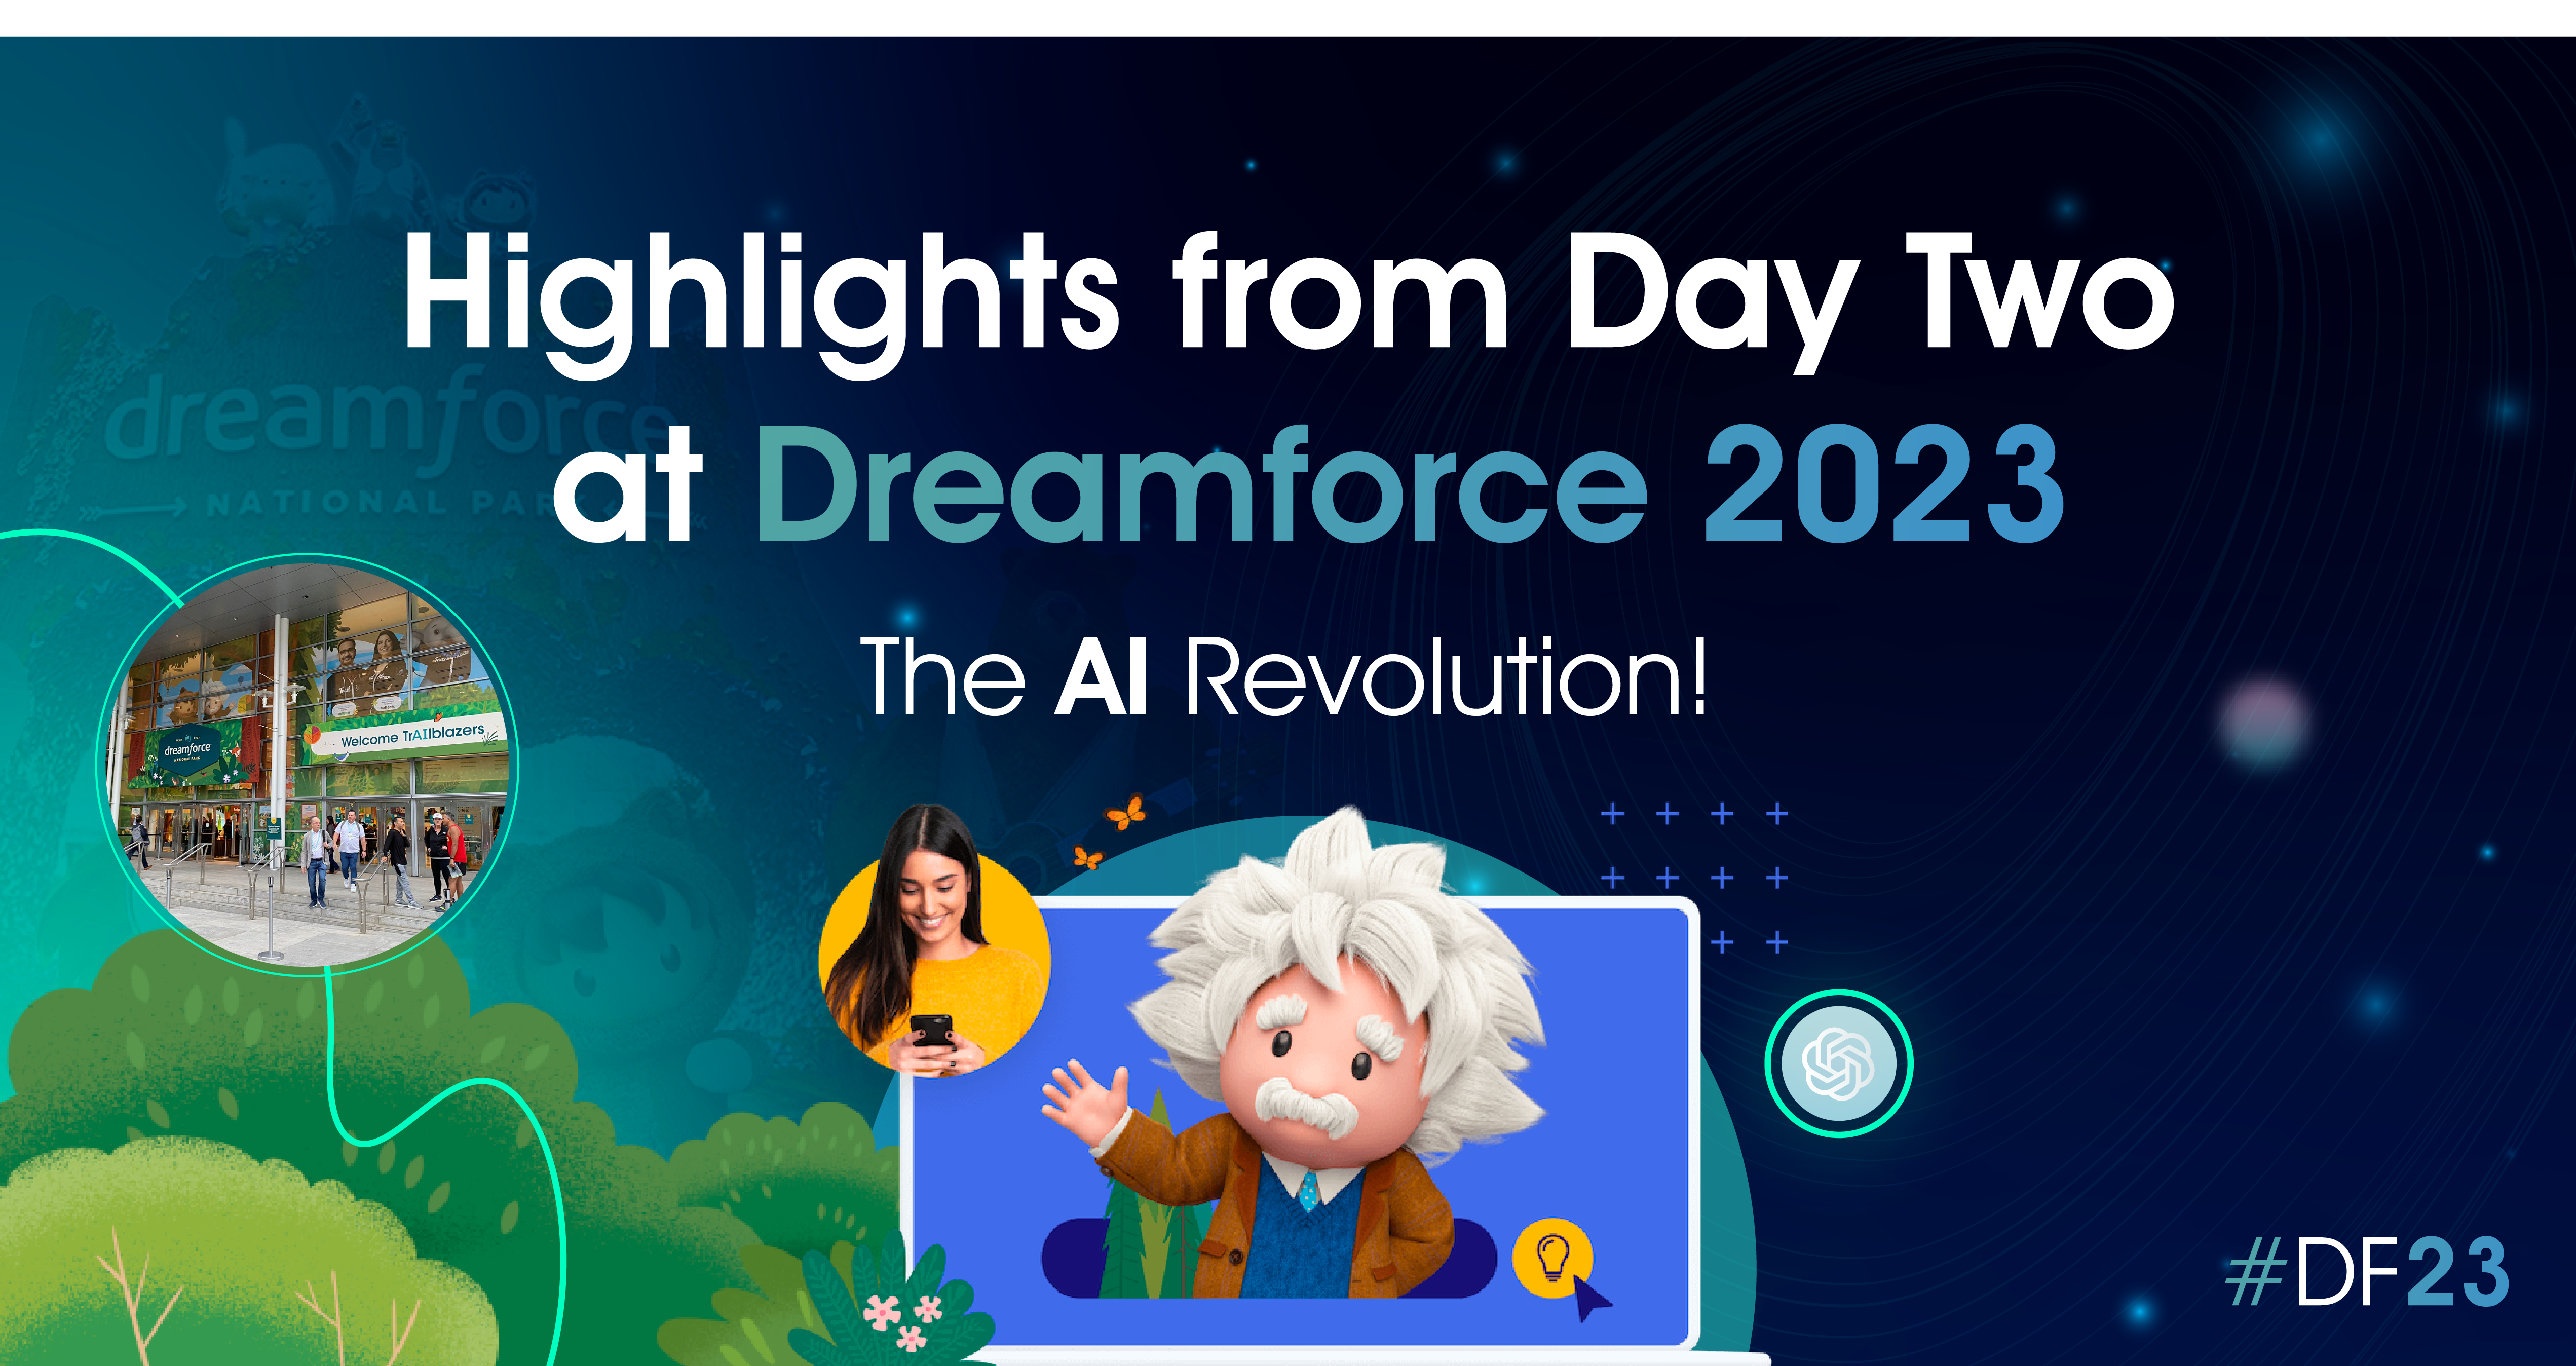 Highlights from Day Two at Dreamforce 2023